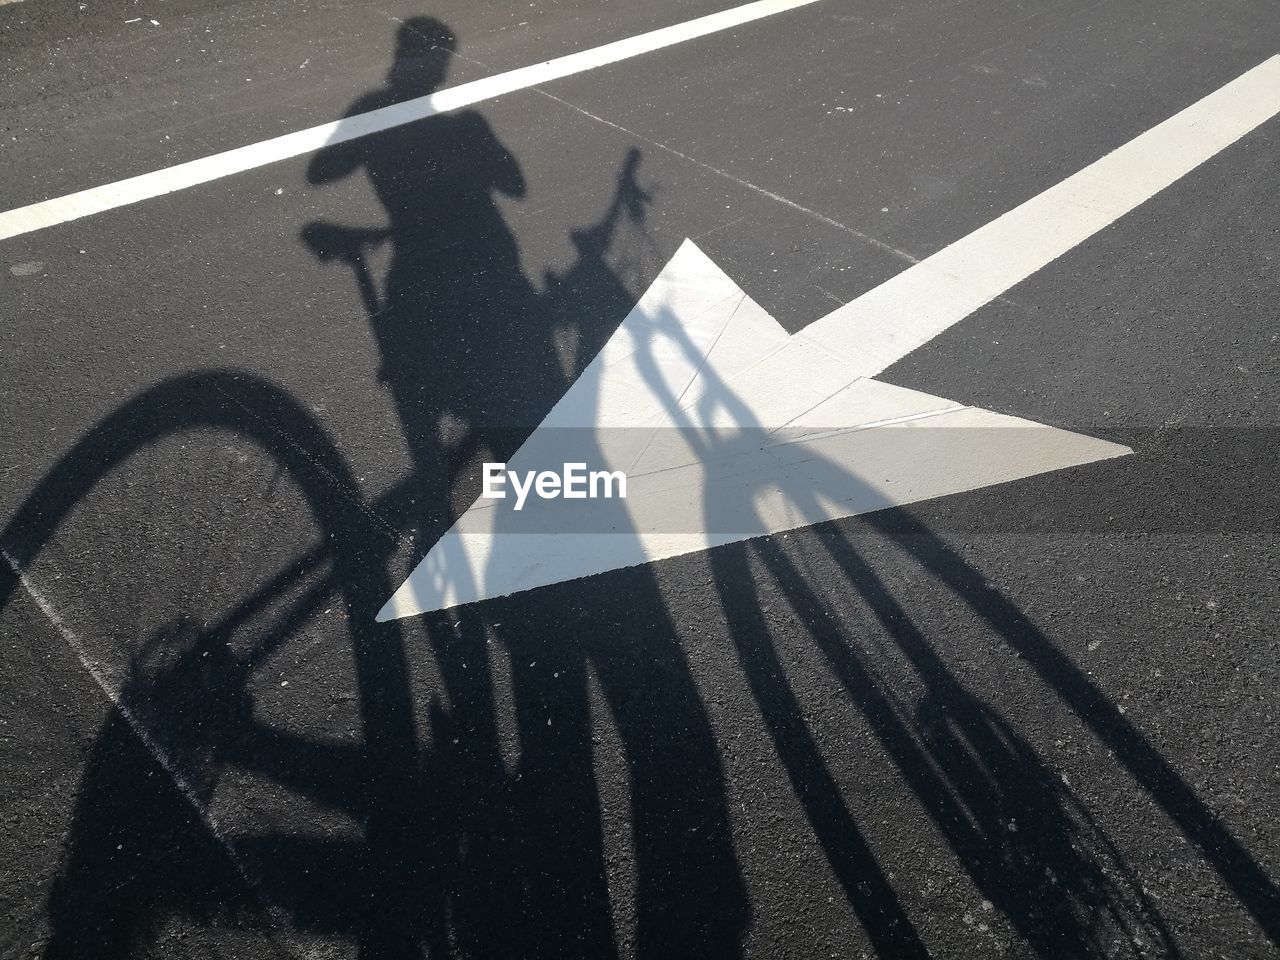 Shadow of woman with bicycle on road marking during sunny day